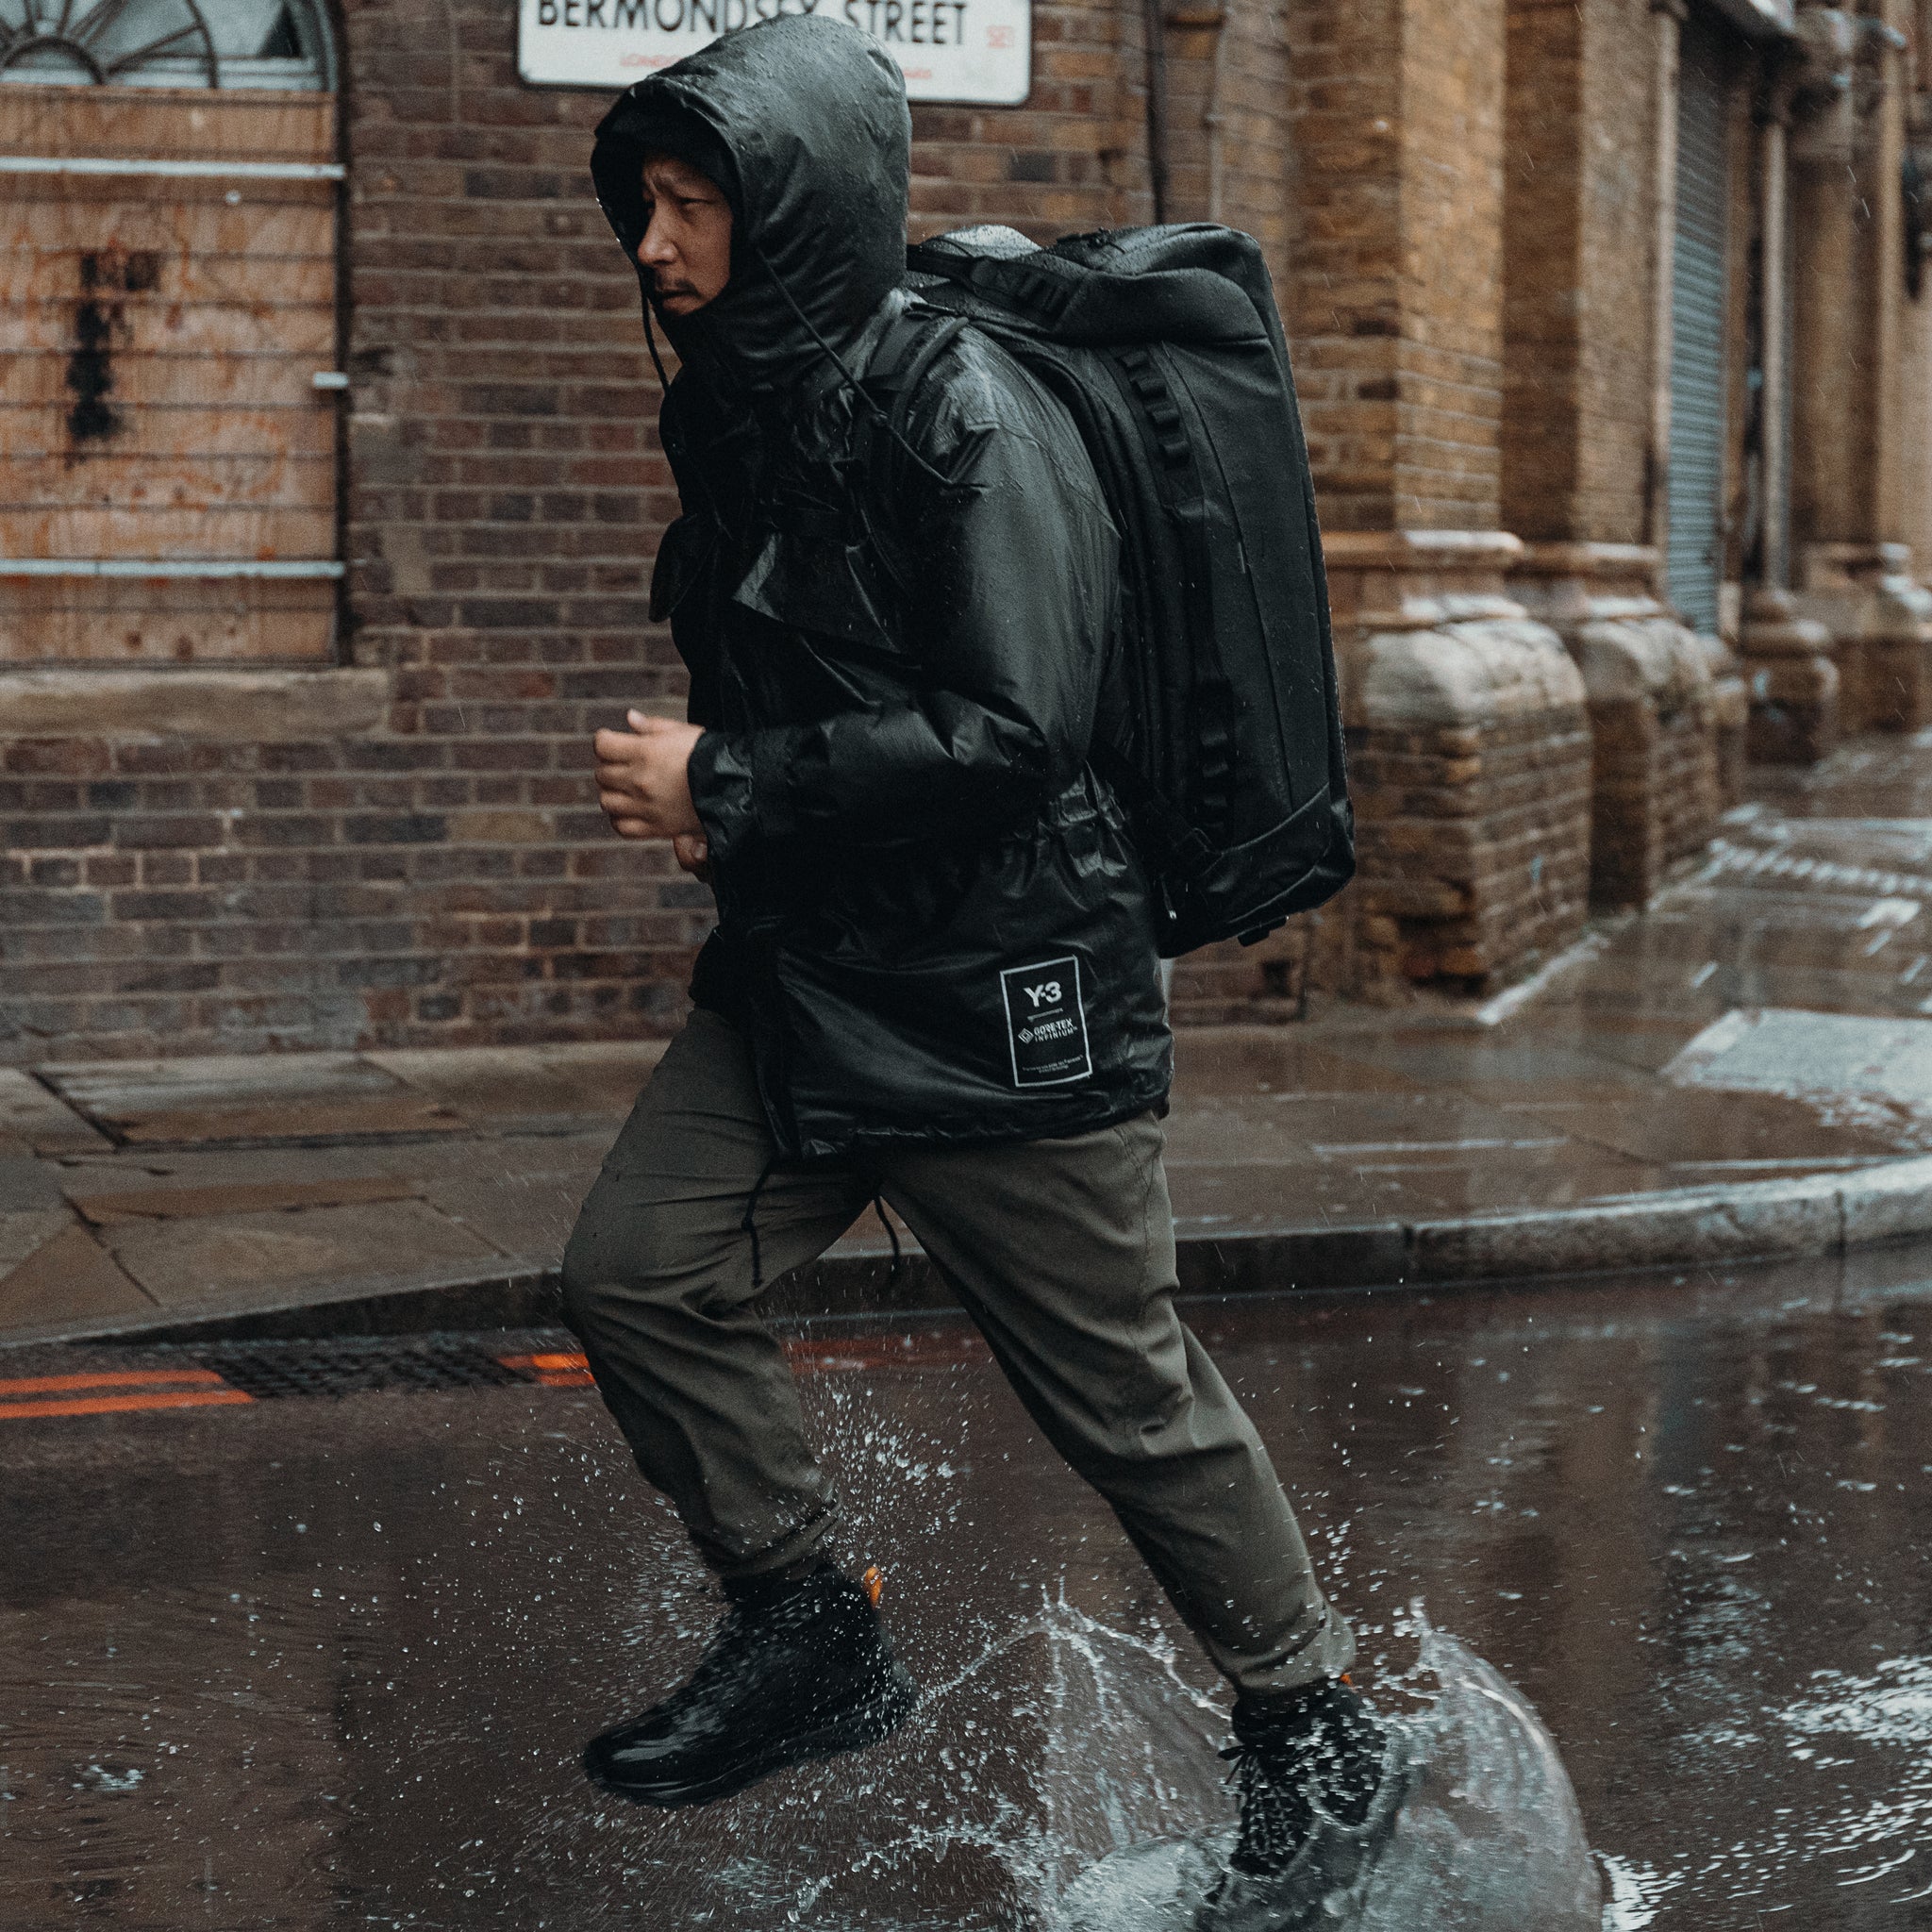 A man running through a puddle in the rain with an All Black Kit Bag 65L on his back